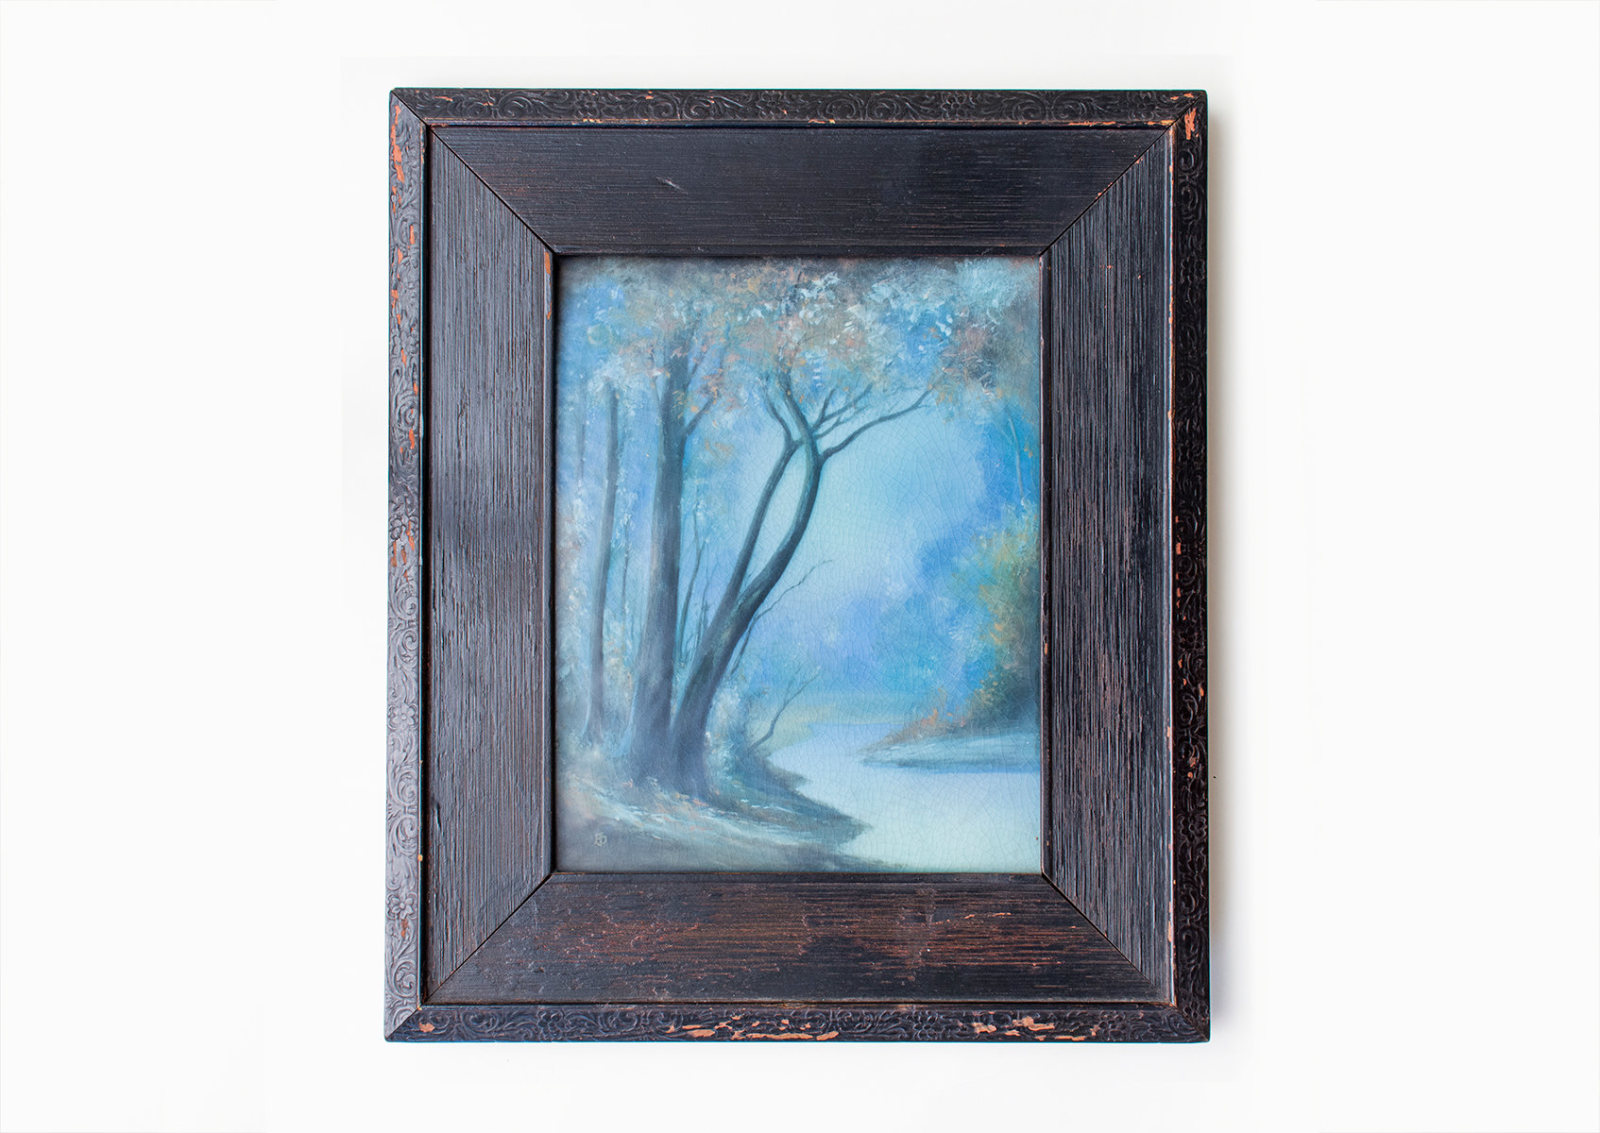 a glazed ceramic plaque in period wooden frame dating to 1914 by american art pottery company rookwood, the scene of a hazy landscape in the ohio river valley with small creek and trees, in the scenic vellum glaze known for tonalist style landscapes